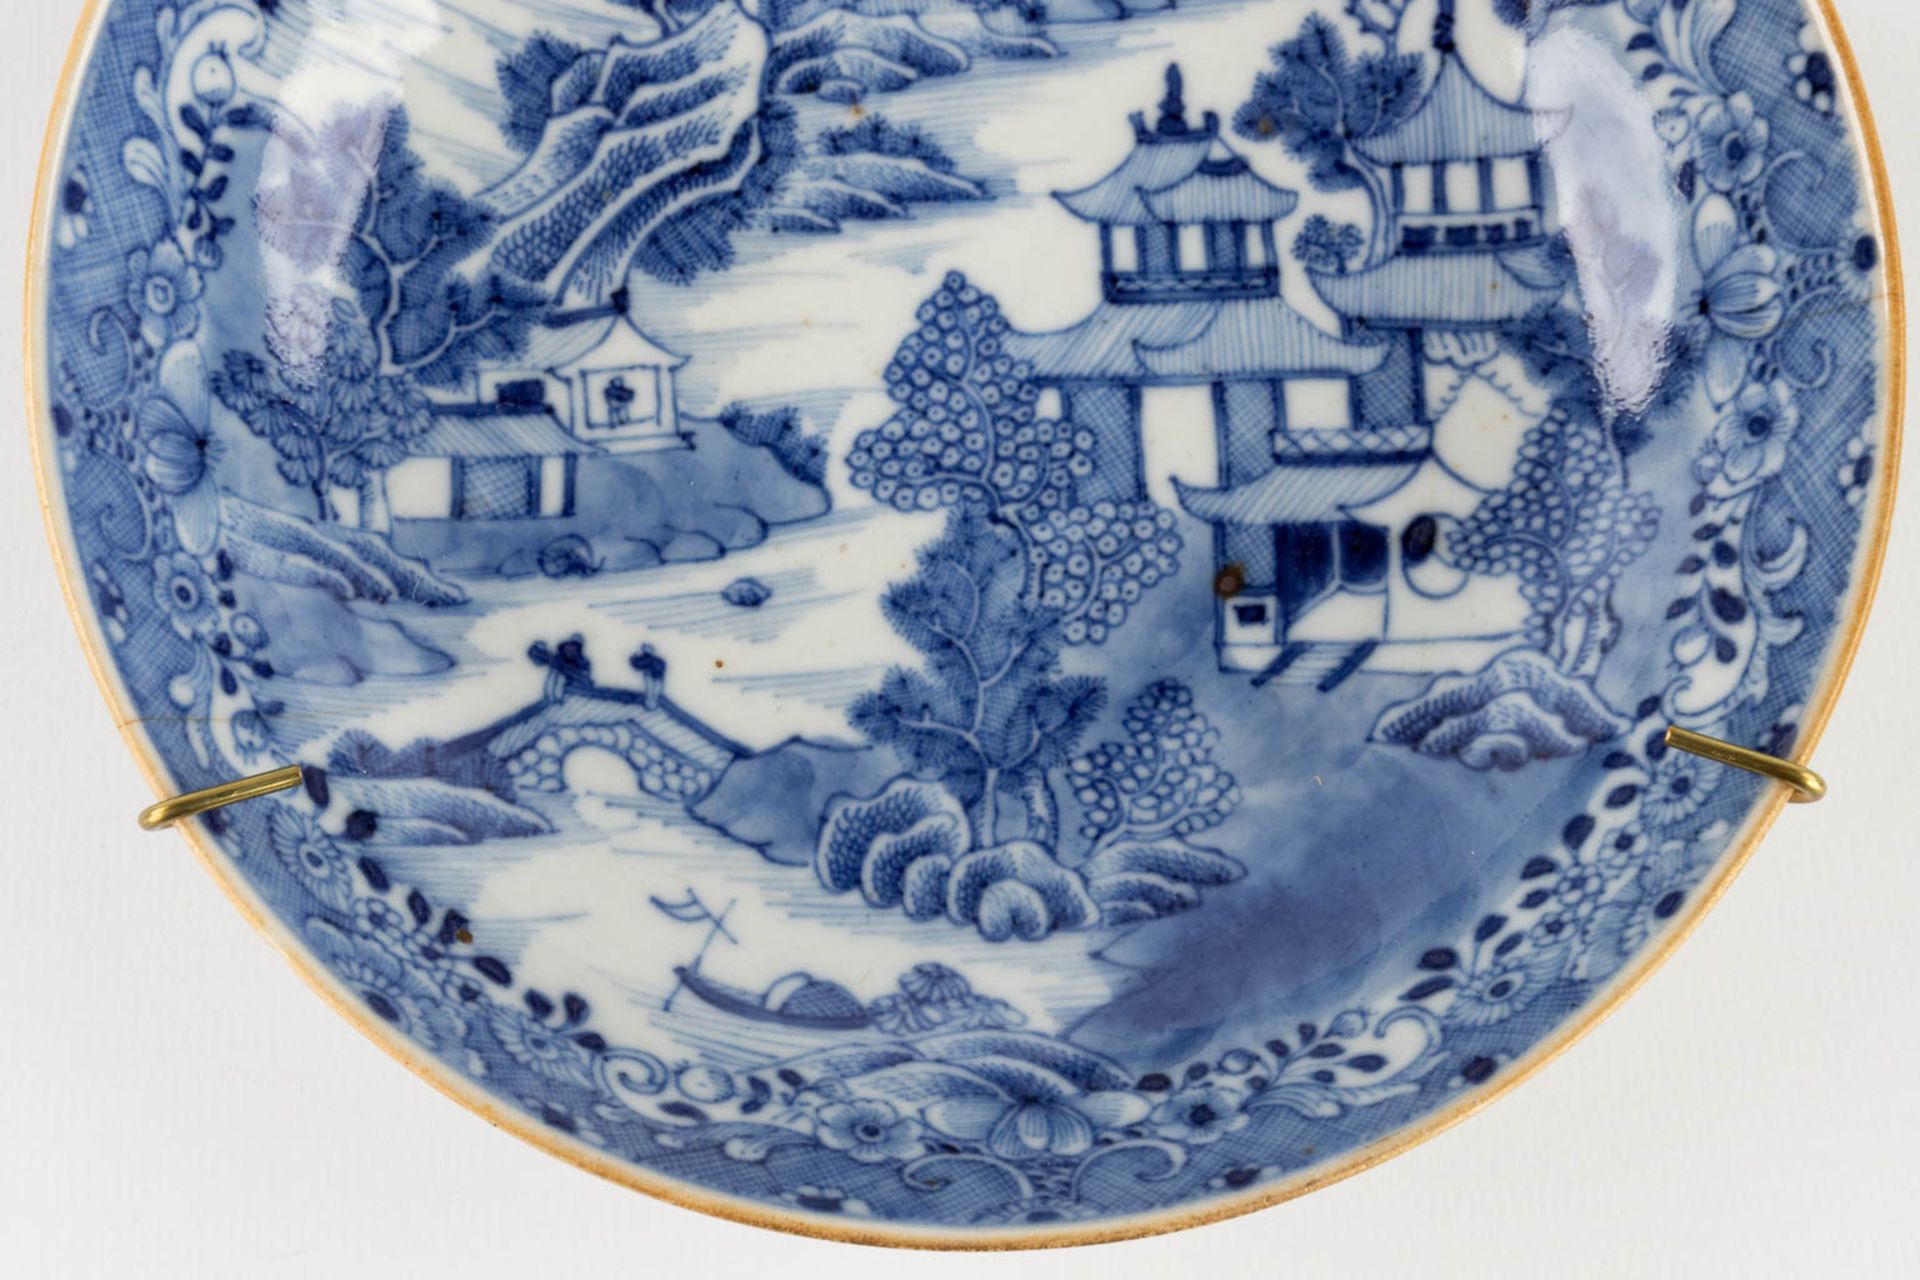 Two Chinese plates with blue-white landscape decor. 19th/20th C. (H:4 x D:16 cm) - Image 7 of 9